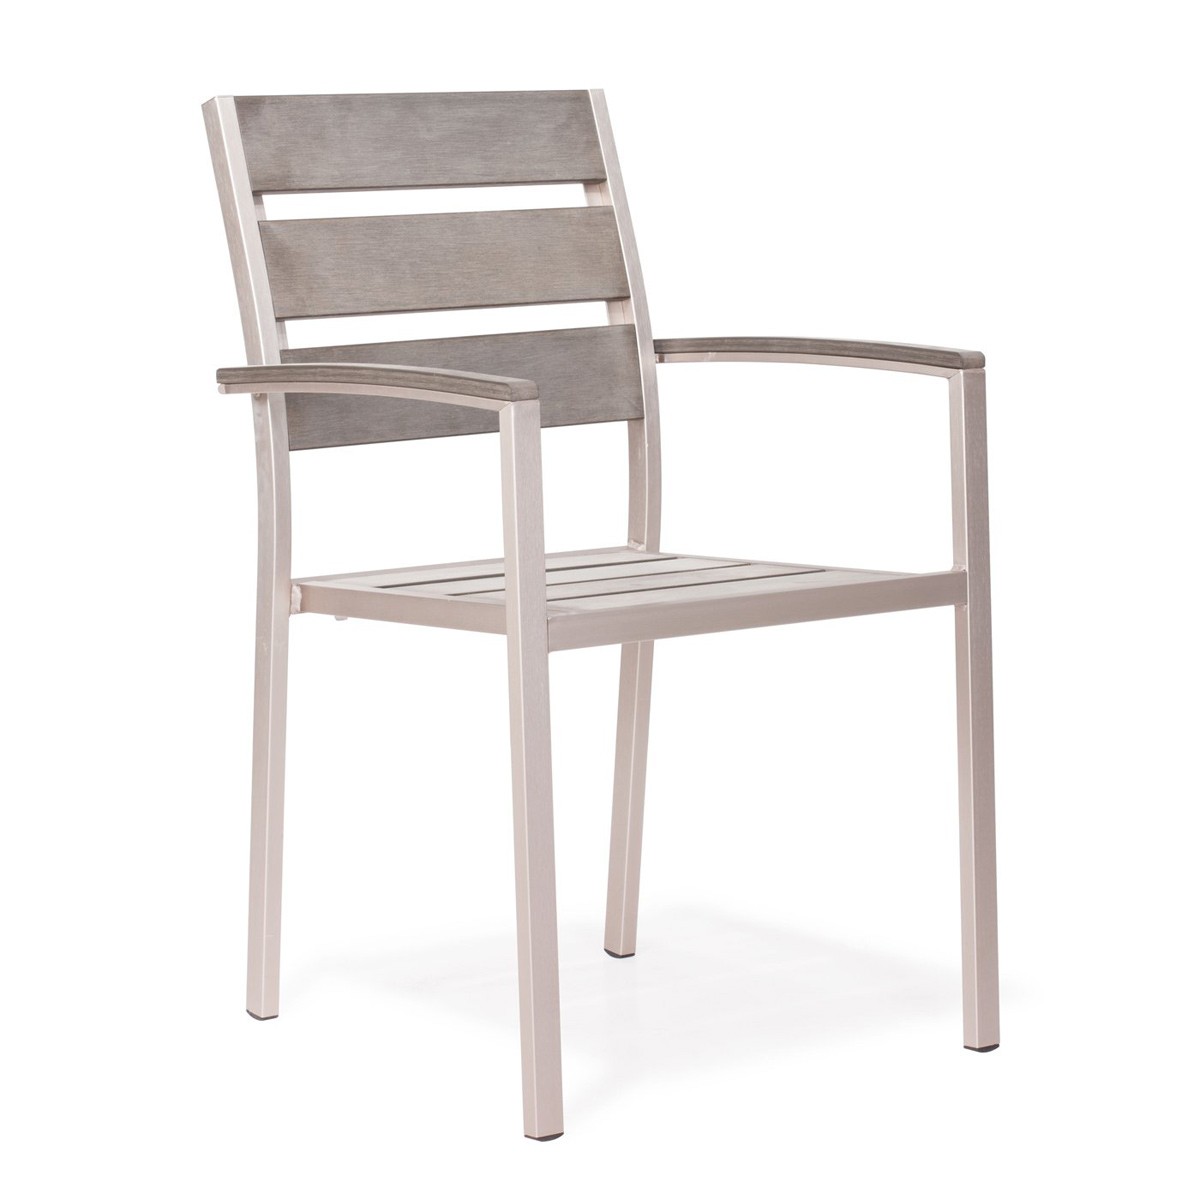 Zuo Modern Metropolitan Dining Slated Arm Chair - Brushed Aluminum